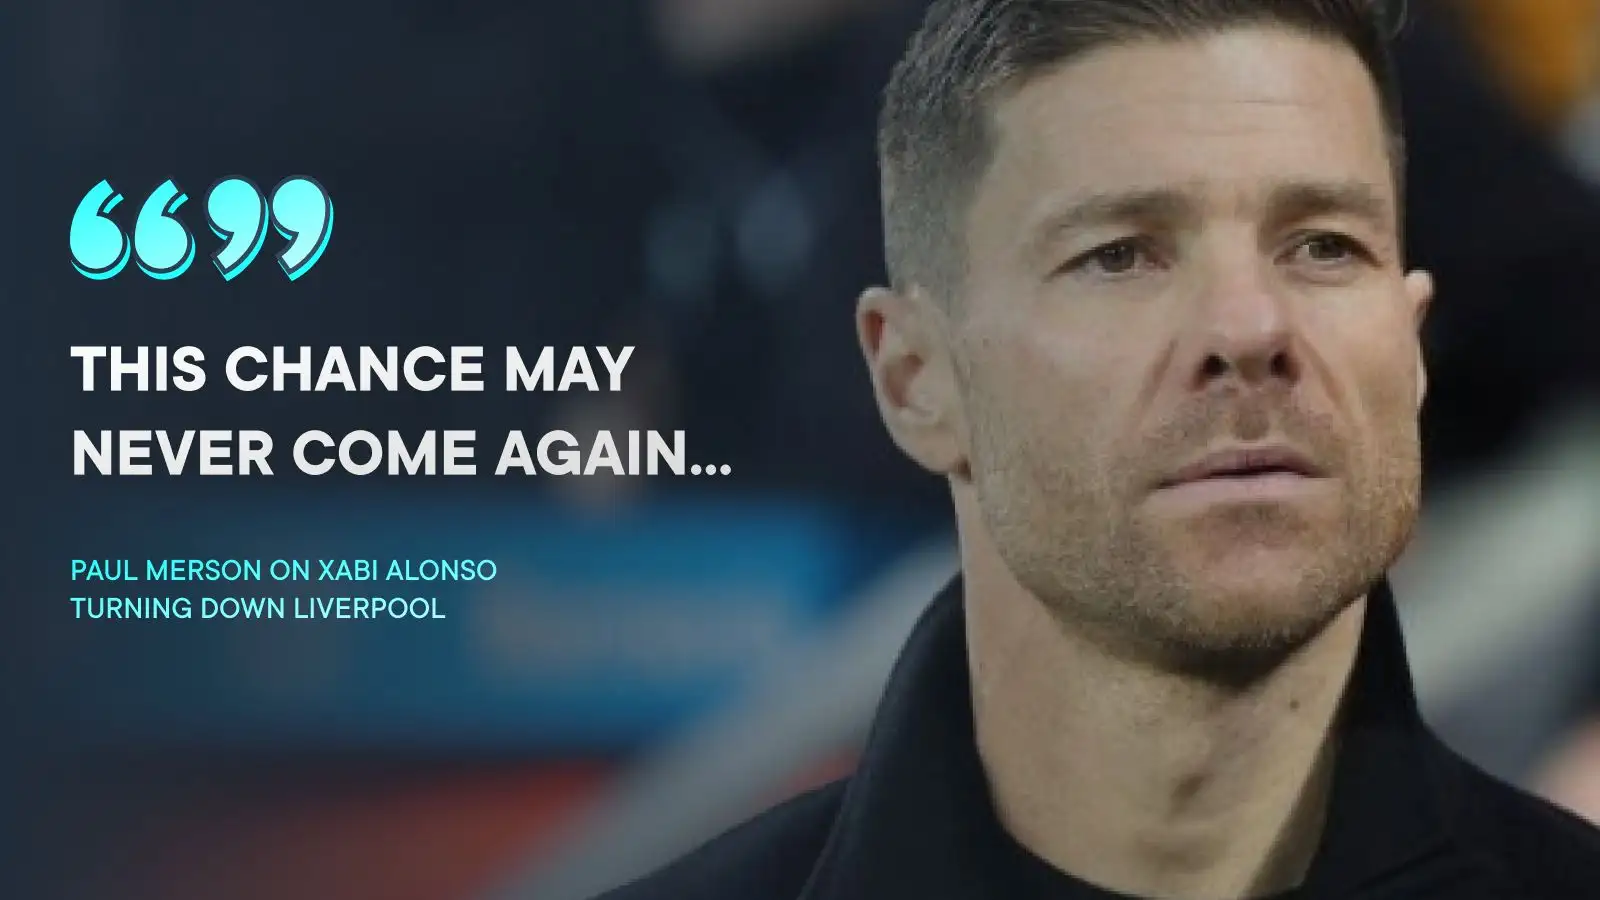 Xabi Alonso could remorse swivelling down Liverpool, cases Paul Merson.